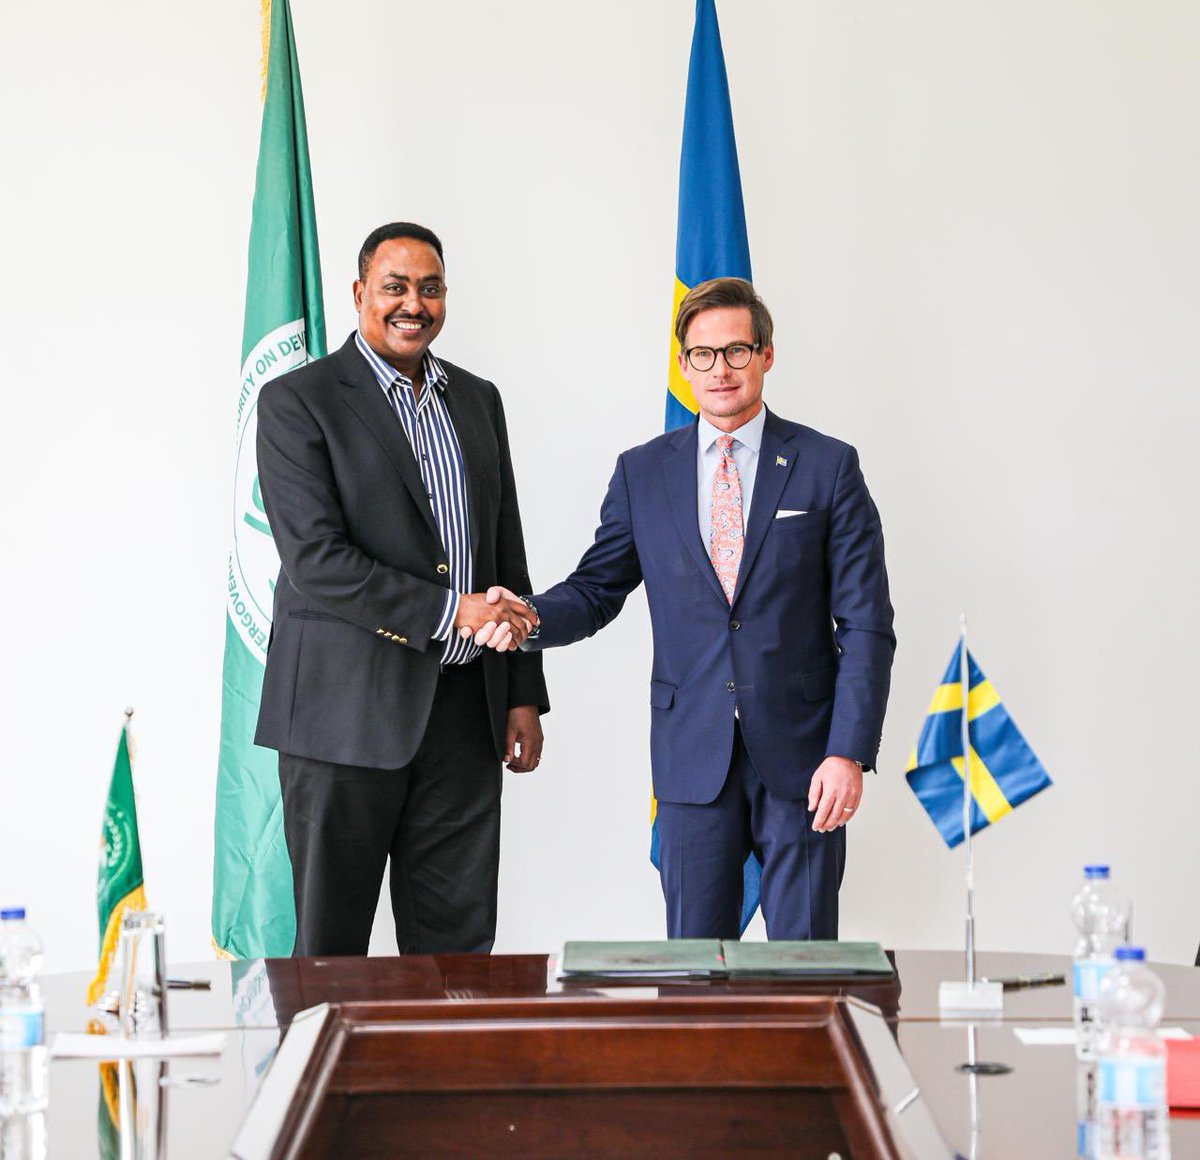 Met with @IGADsecretariat Executive Secretary @DrWorkneh Sweden 🇸🇪 is a firm and long-standing partner of IGAD and deeper regional integration. IGAD is and should be a central strategic actor in ensuring peace and security in the sub-region. @SweinEthiopia